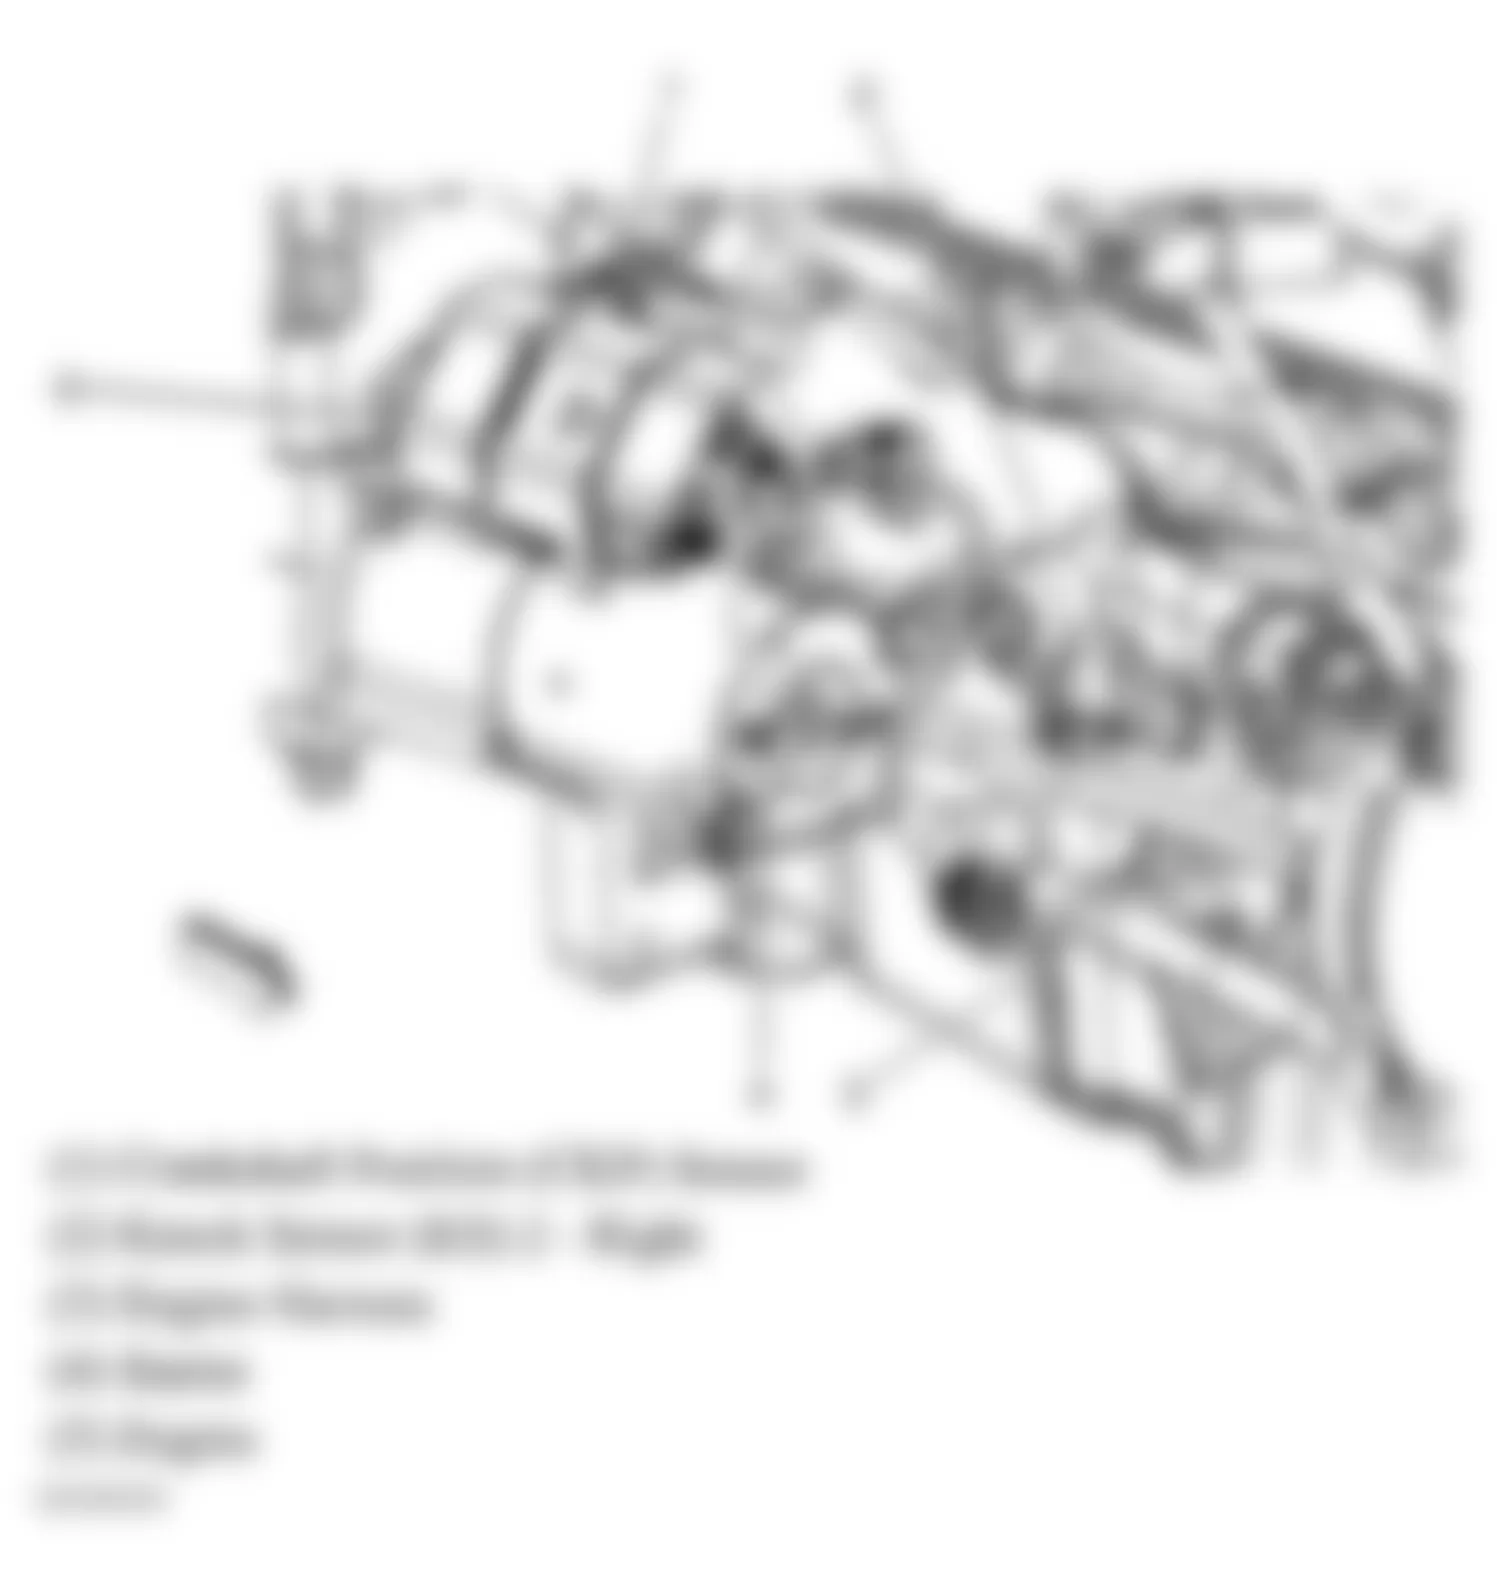 GMC Envoy XL 2005 - Component Locations -  Lower Right Rear Of Engine (5.3L)